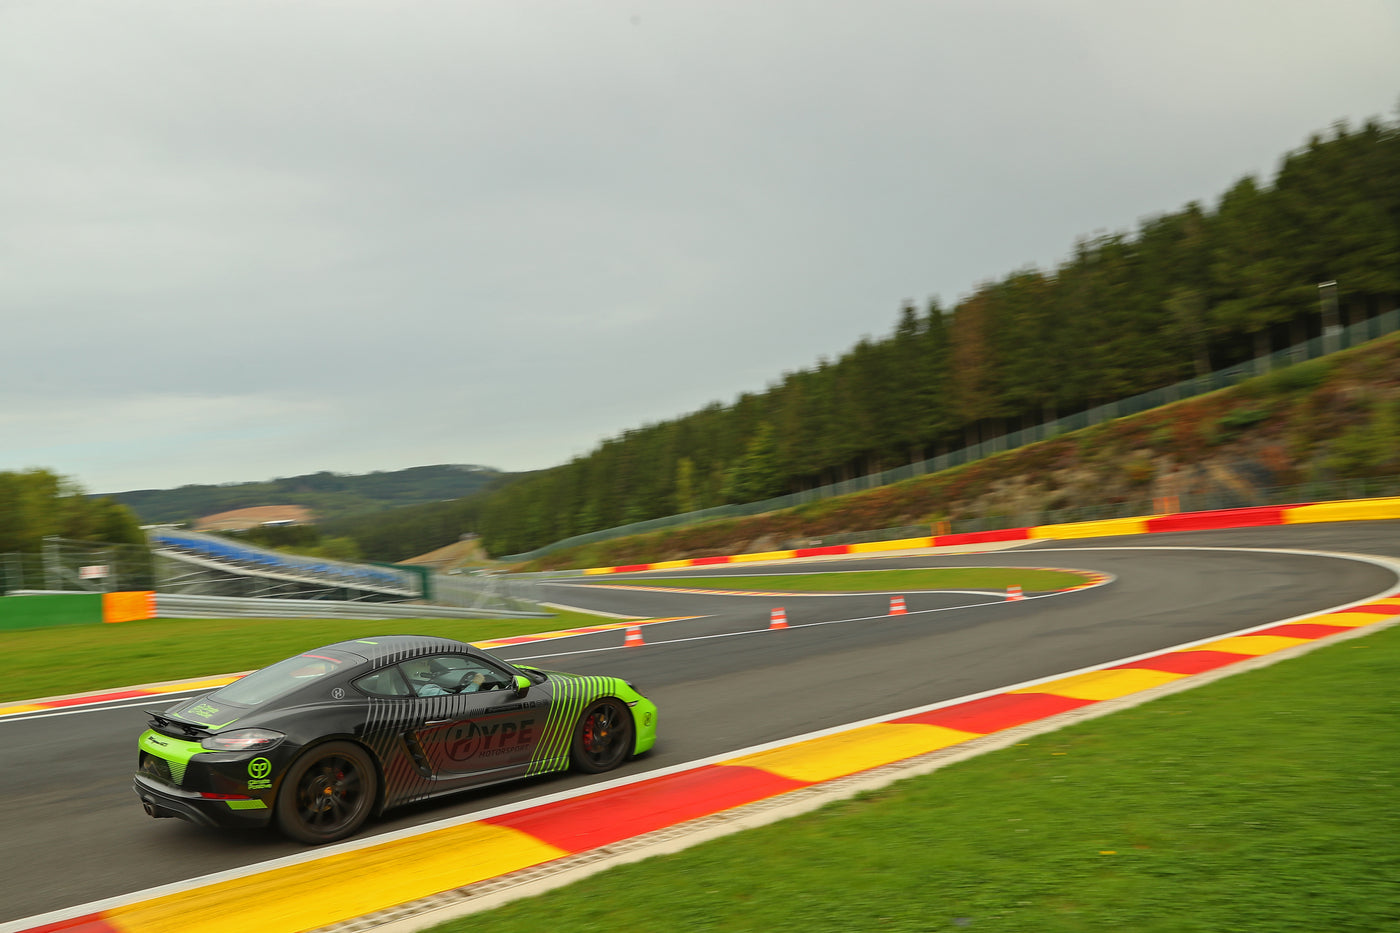 Spa Francorchamps | 7th August